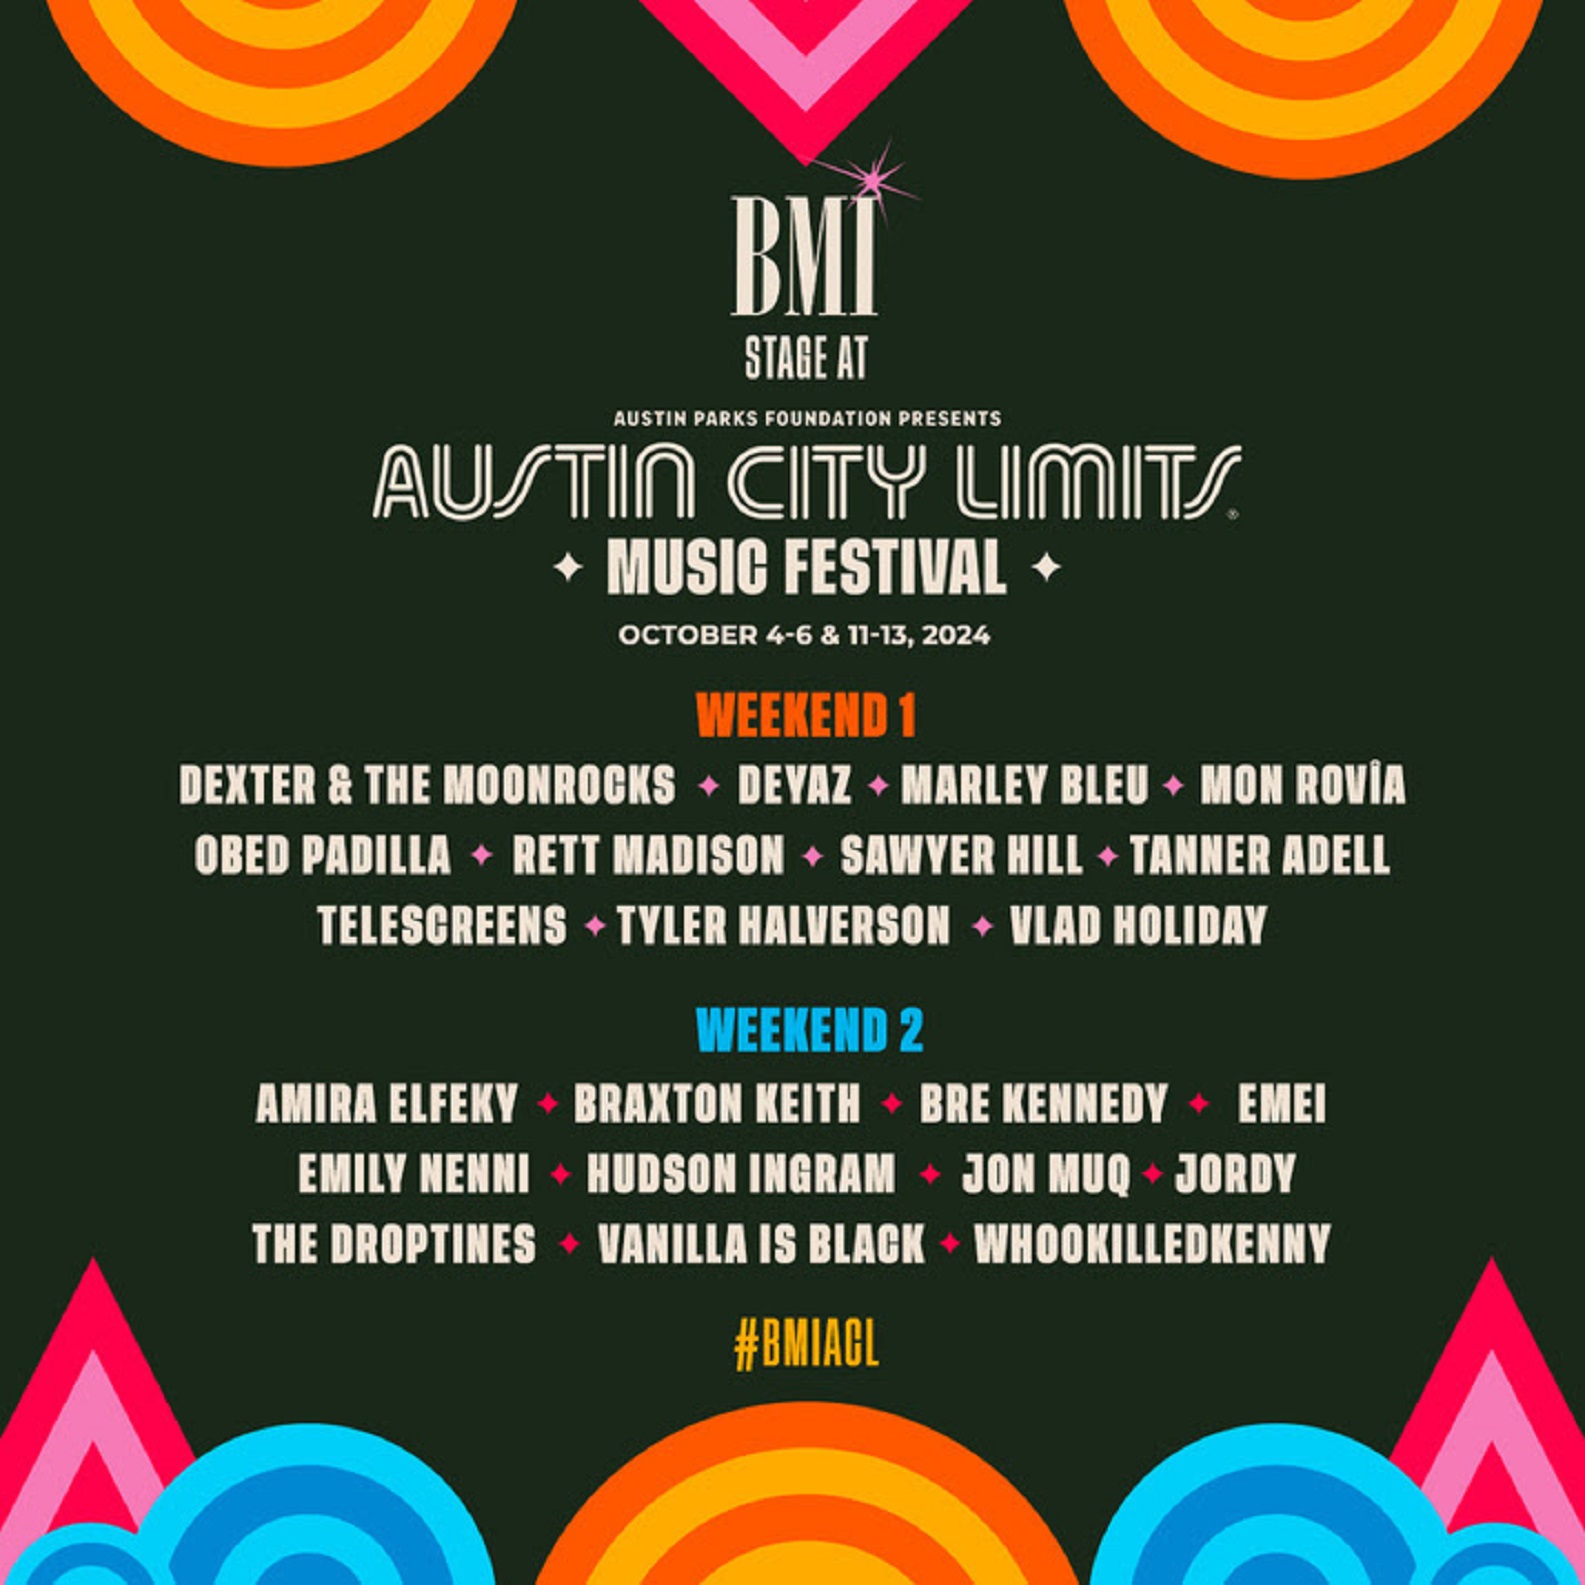 BMI RETURNS TO ACL FEST WITH SIGNATURE STAGE, CELEBRATING 21 YEARS